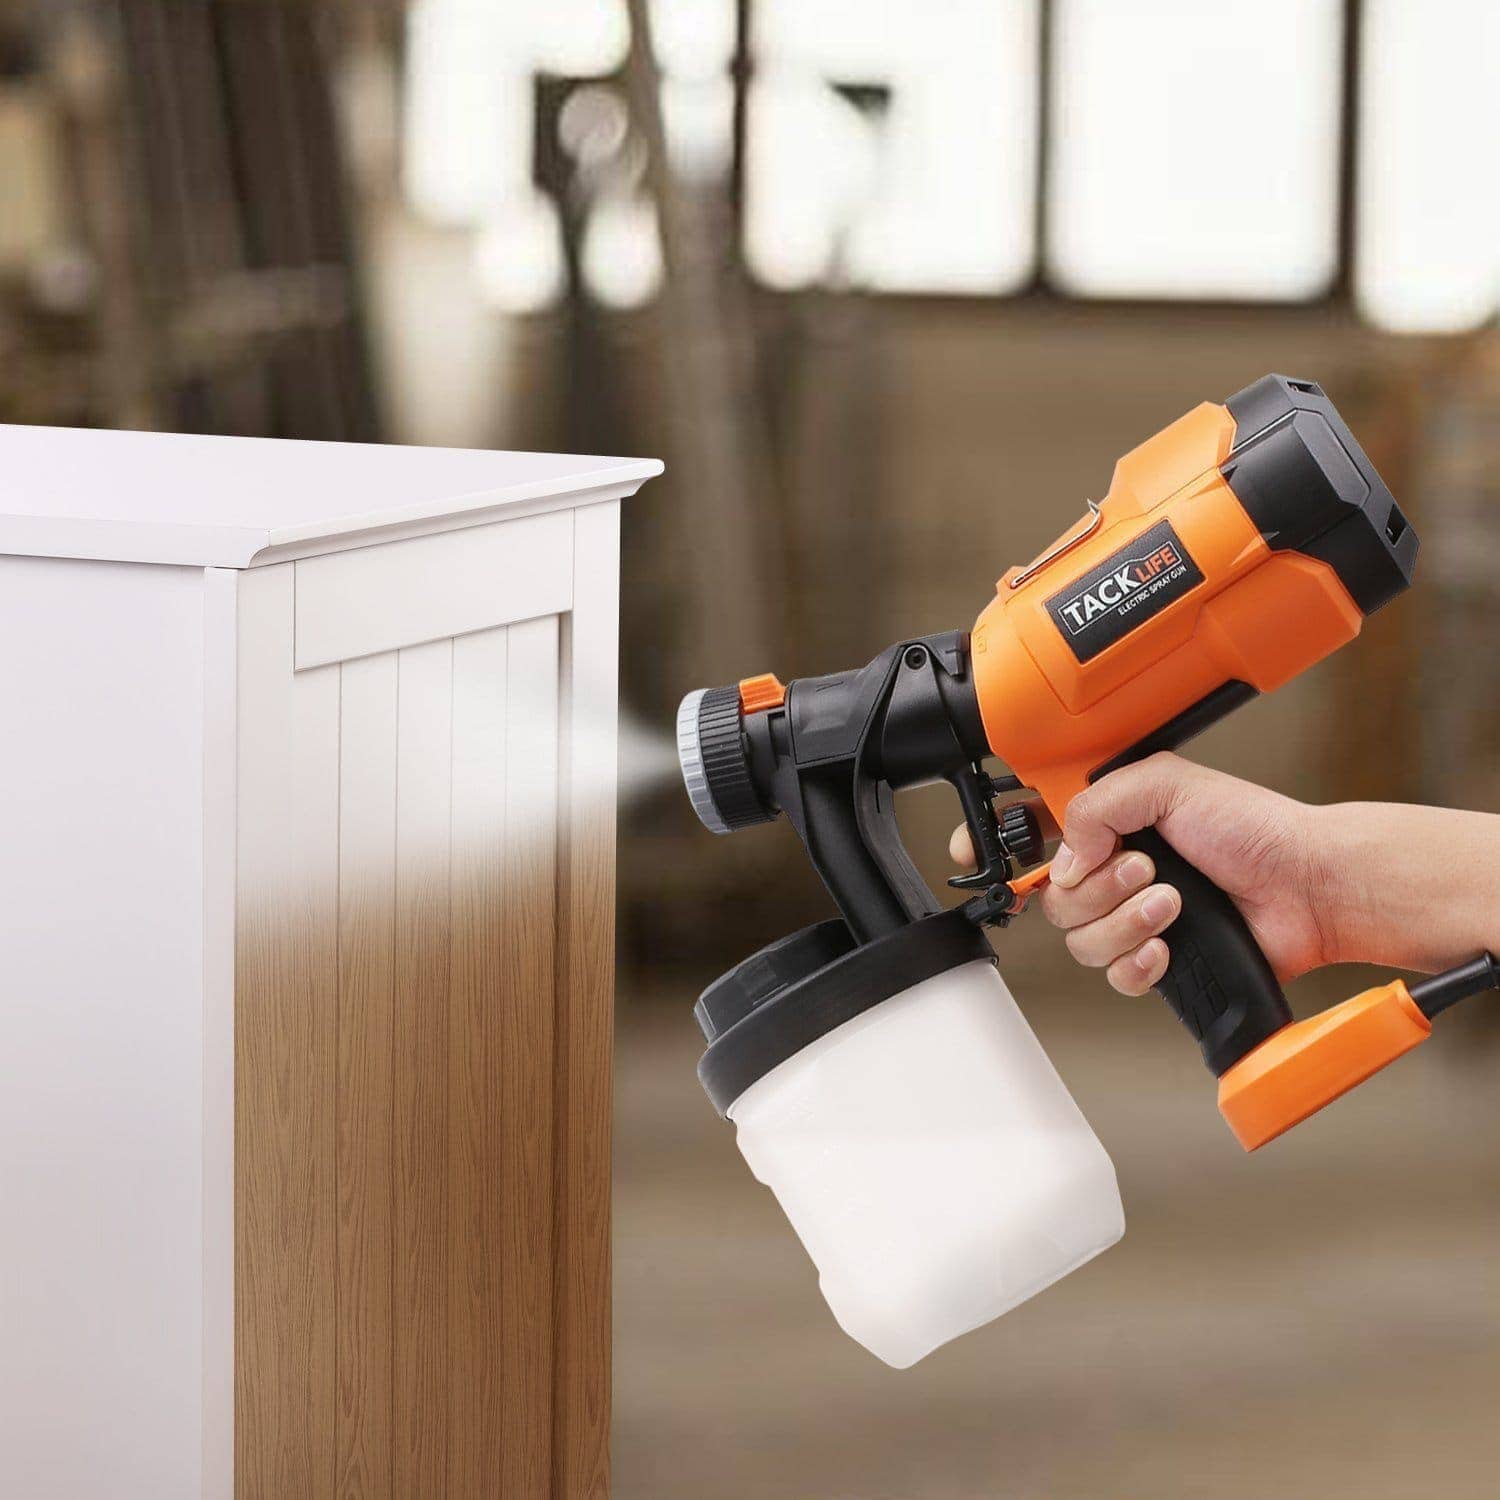 5 Best Paint Sprayers for Furniture 2023 - Reviews & Buying Guide